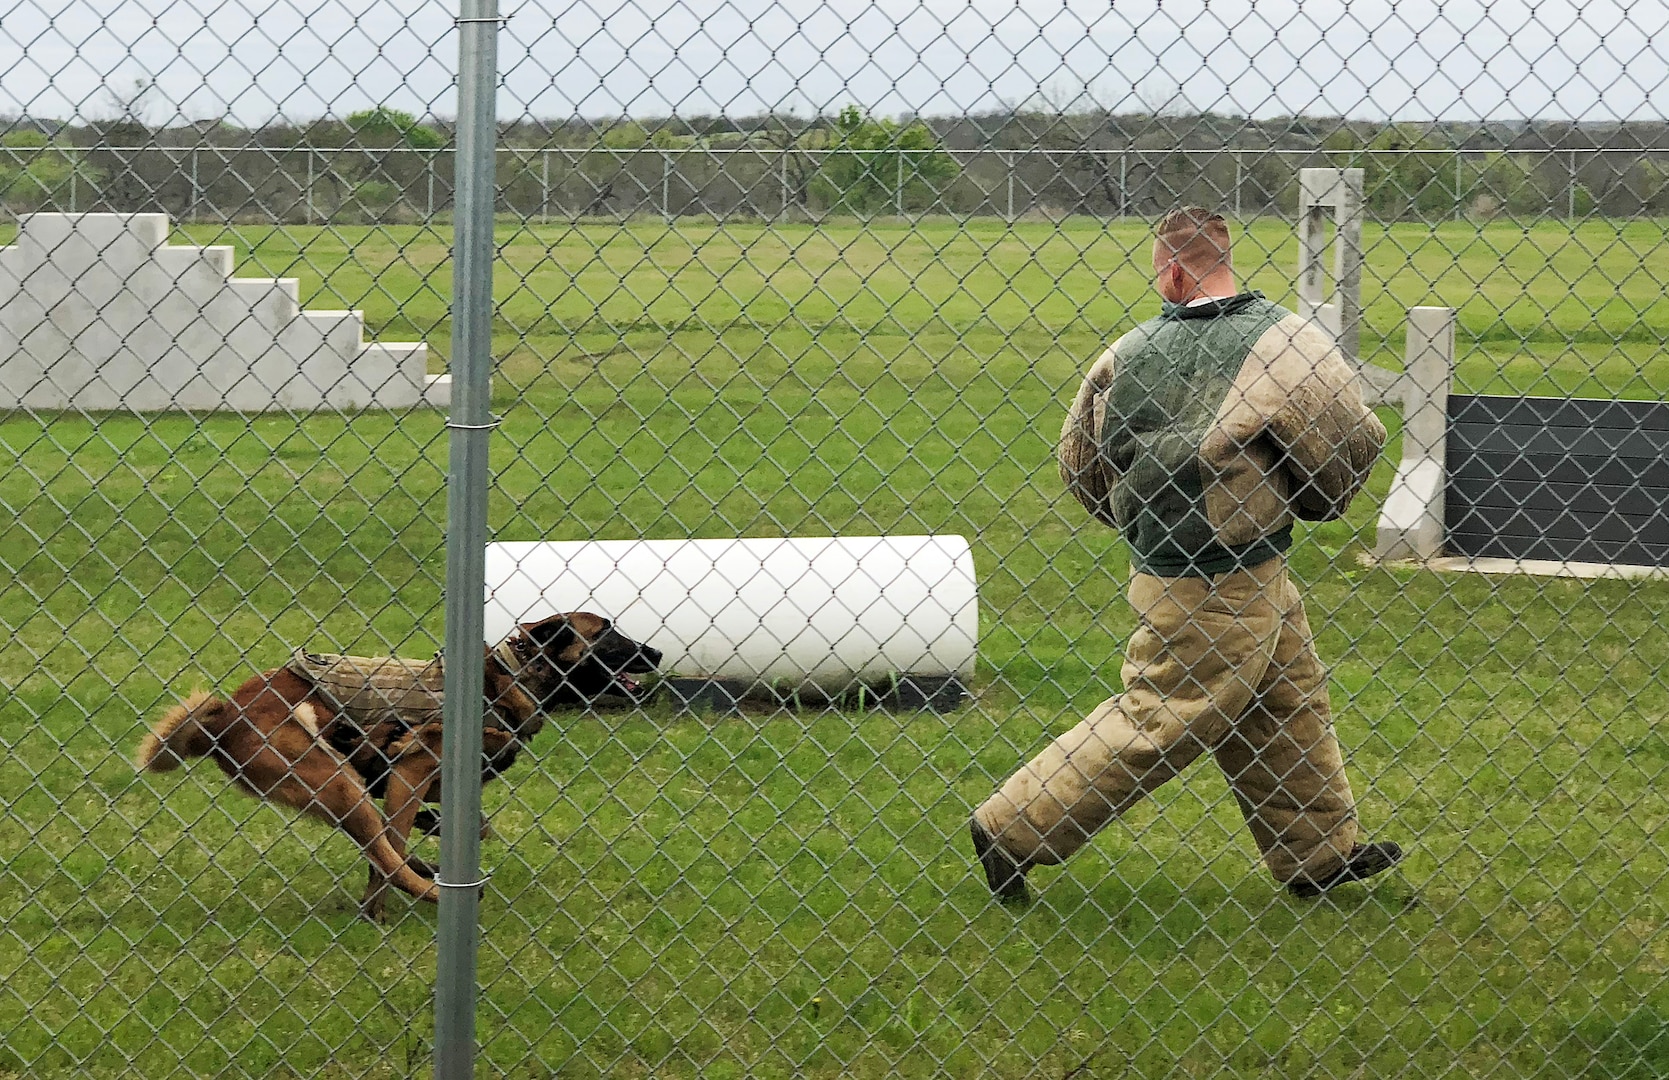 Balto, an 802nd Security Forces Squadron military working dog, chases an 802nd SFS MWD handler, during a demonstration for South San Antonio High School students at Joint Base San Antonio-Lackland March 9. The demonstration was part of a Troops for Teens program event, which links Air Forces Cyber Airmen with SSAHS at-risk teens.